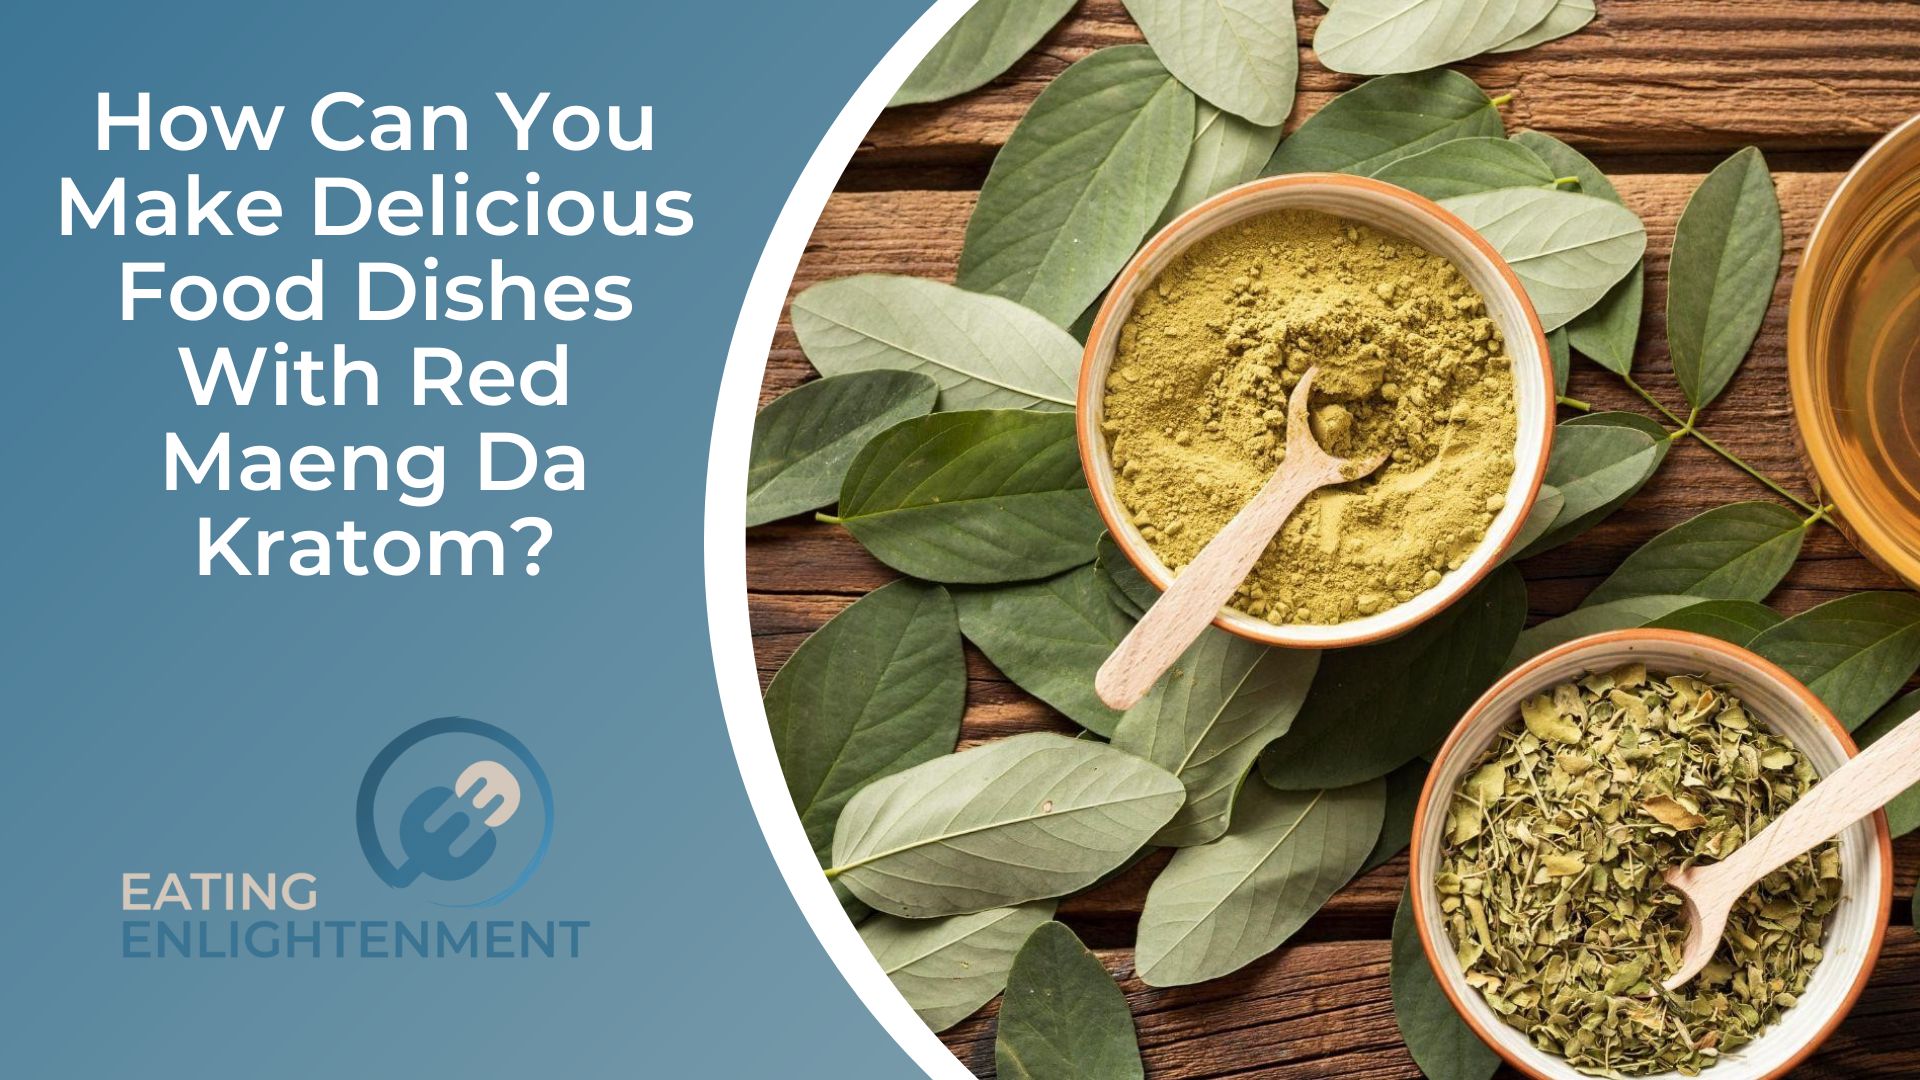 How Can You Make Delicious Food Dishes With Red Maeng Da Kratom